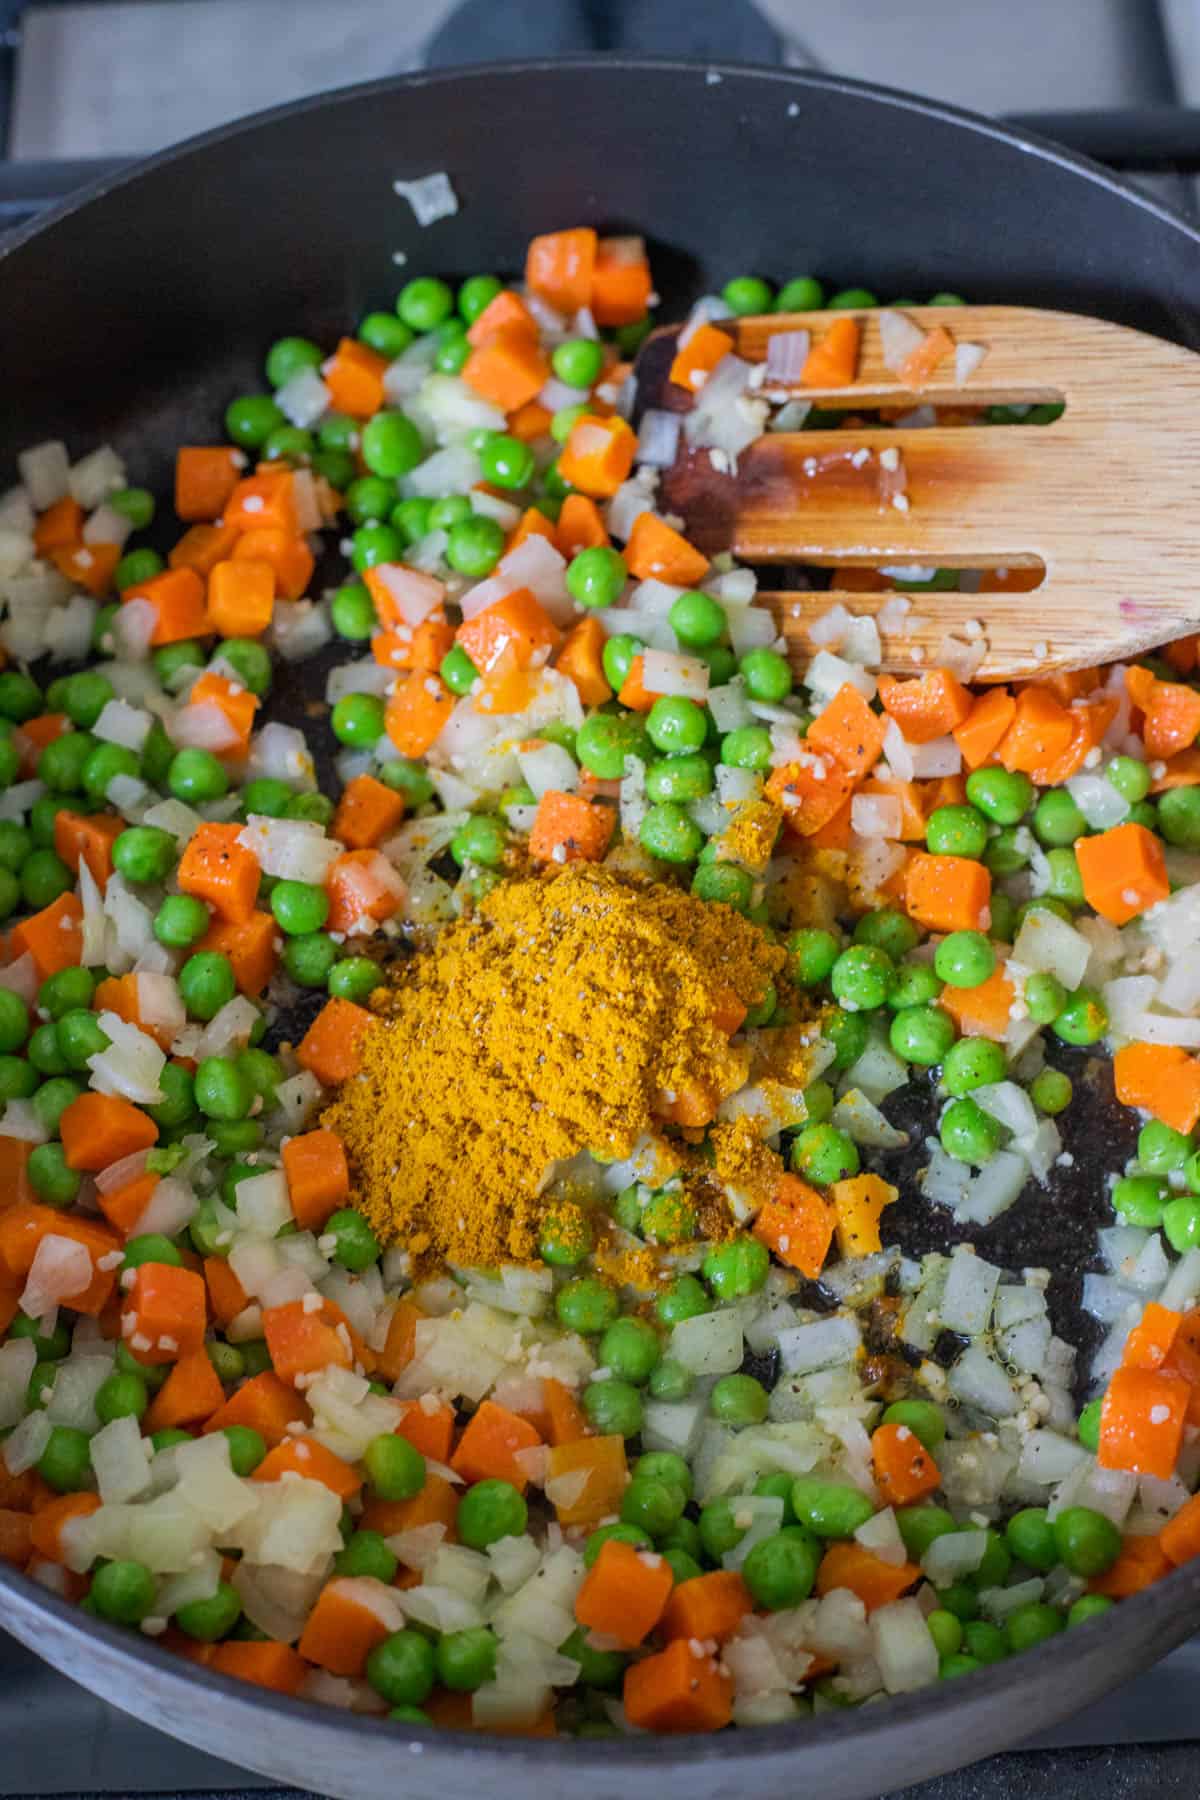 Carrots, peas, and onions, curry powder in a frying pan.